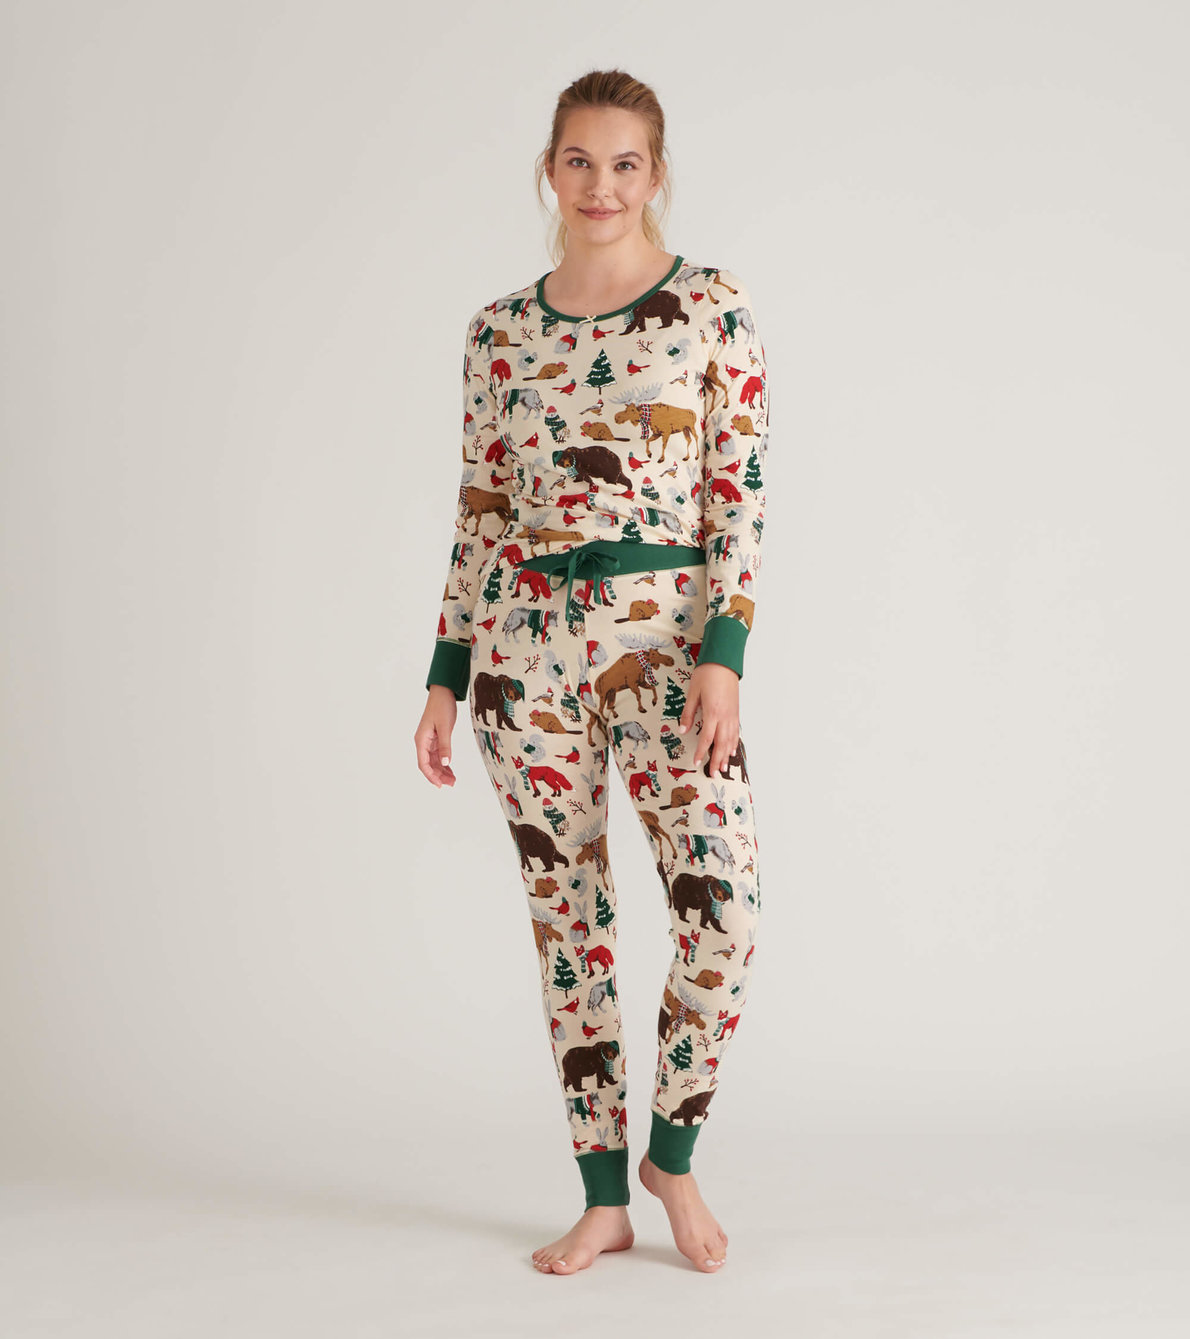 View larger image of Woodland Winter Women's Jersey Top and Leggings Pajama Set